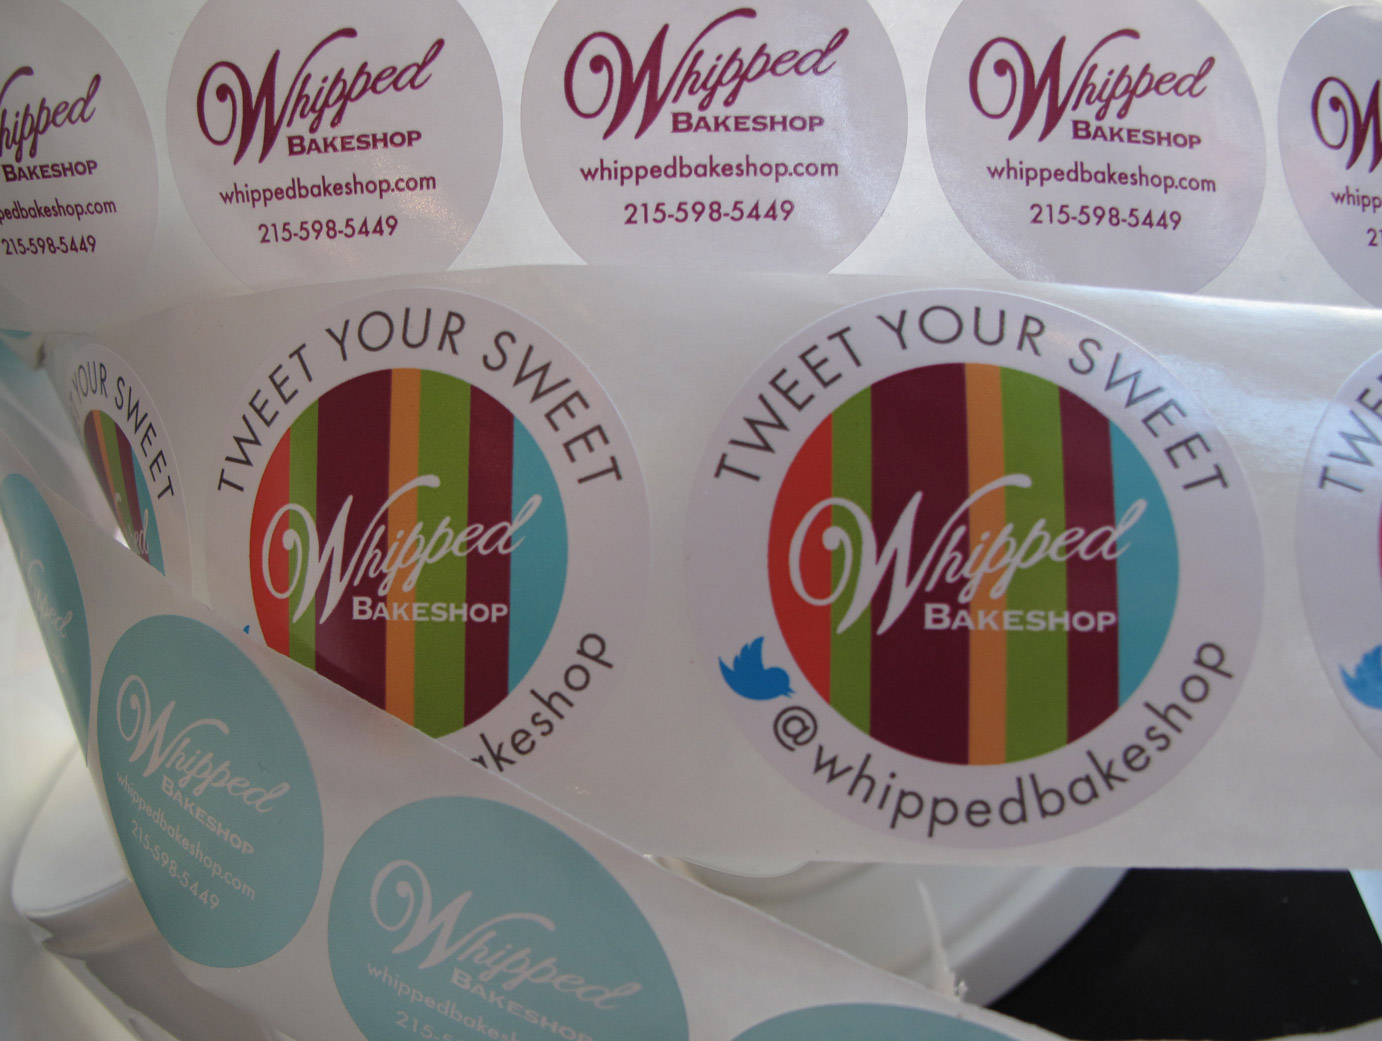 Whipped Bakeshop product labels